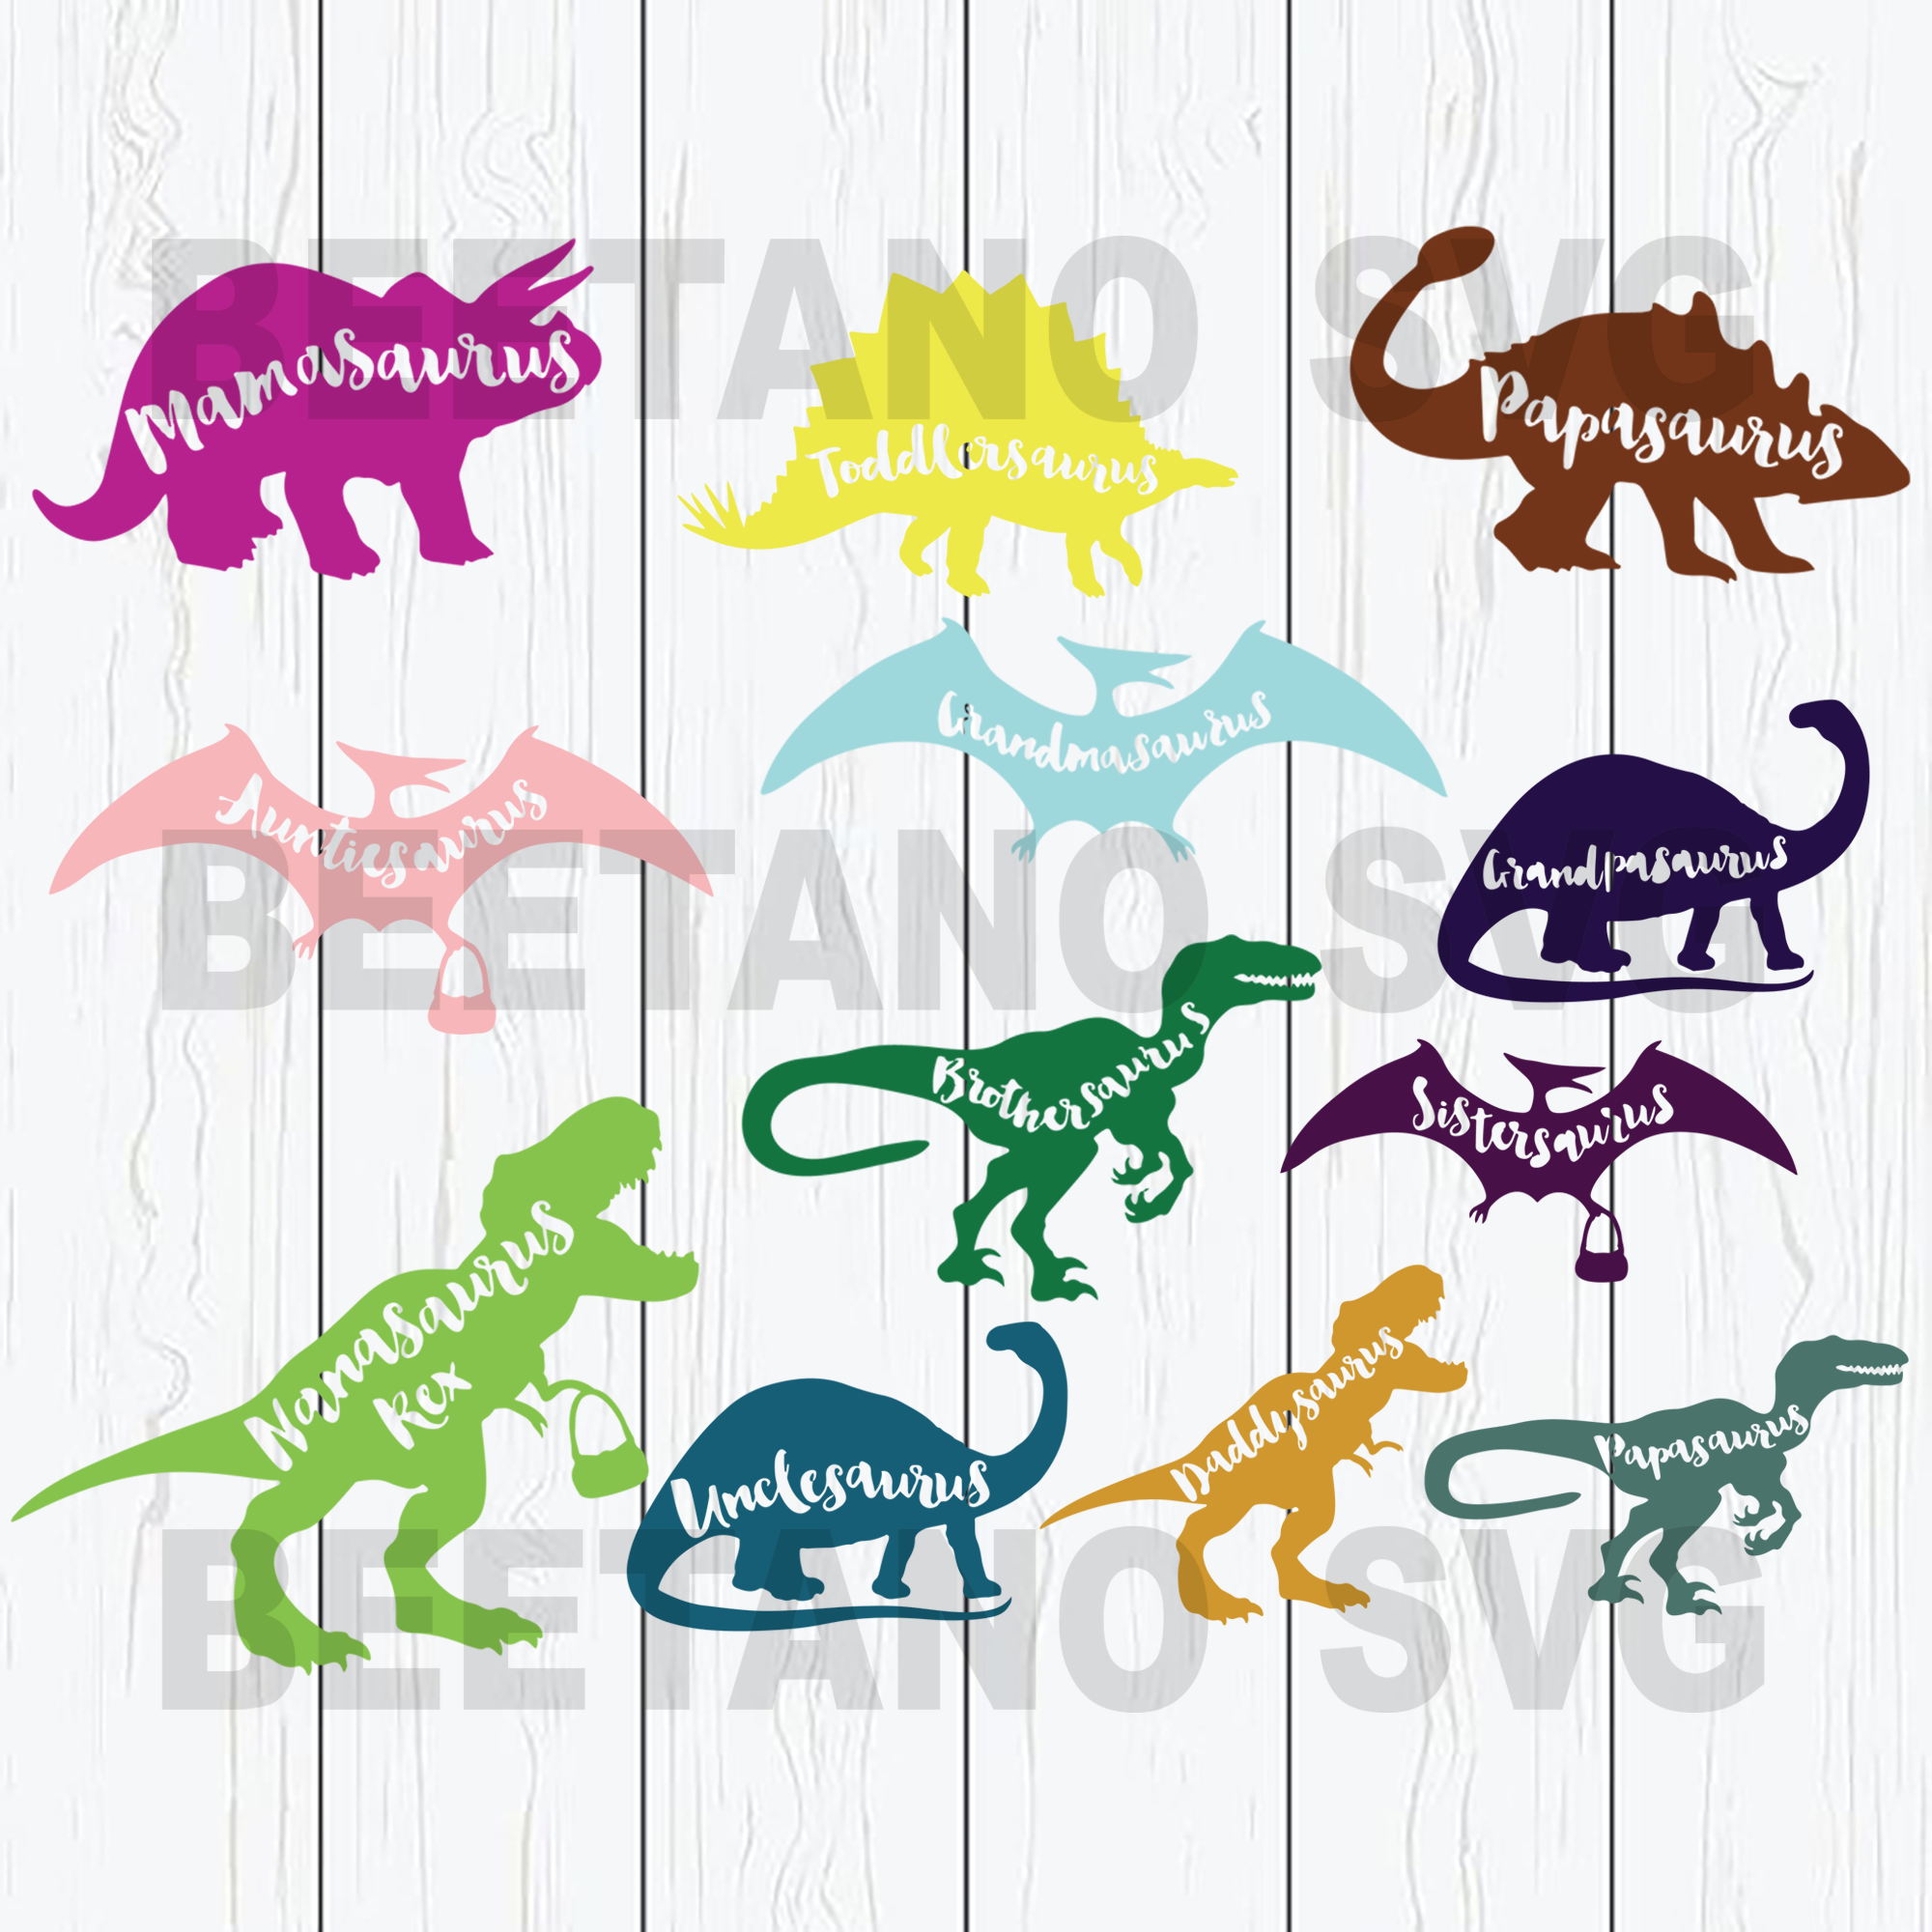 Download Mamasaurus Family Dinosaurs Bundle Cutting Files For Cricut Svg Dxf Beetanosvg Scalable Vector Graphics